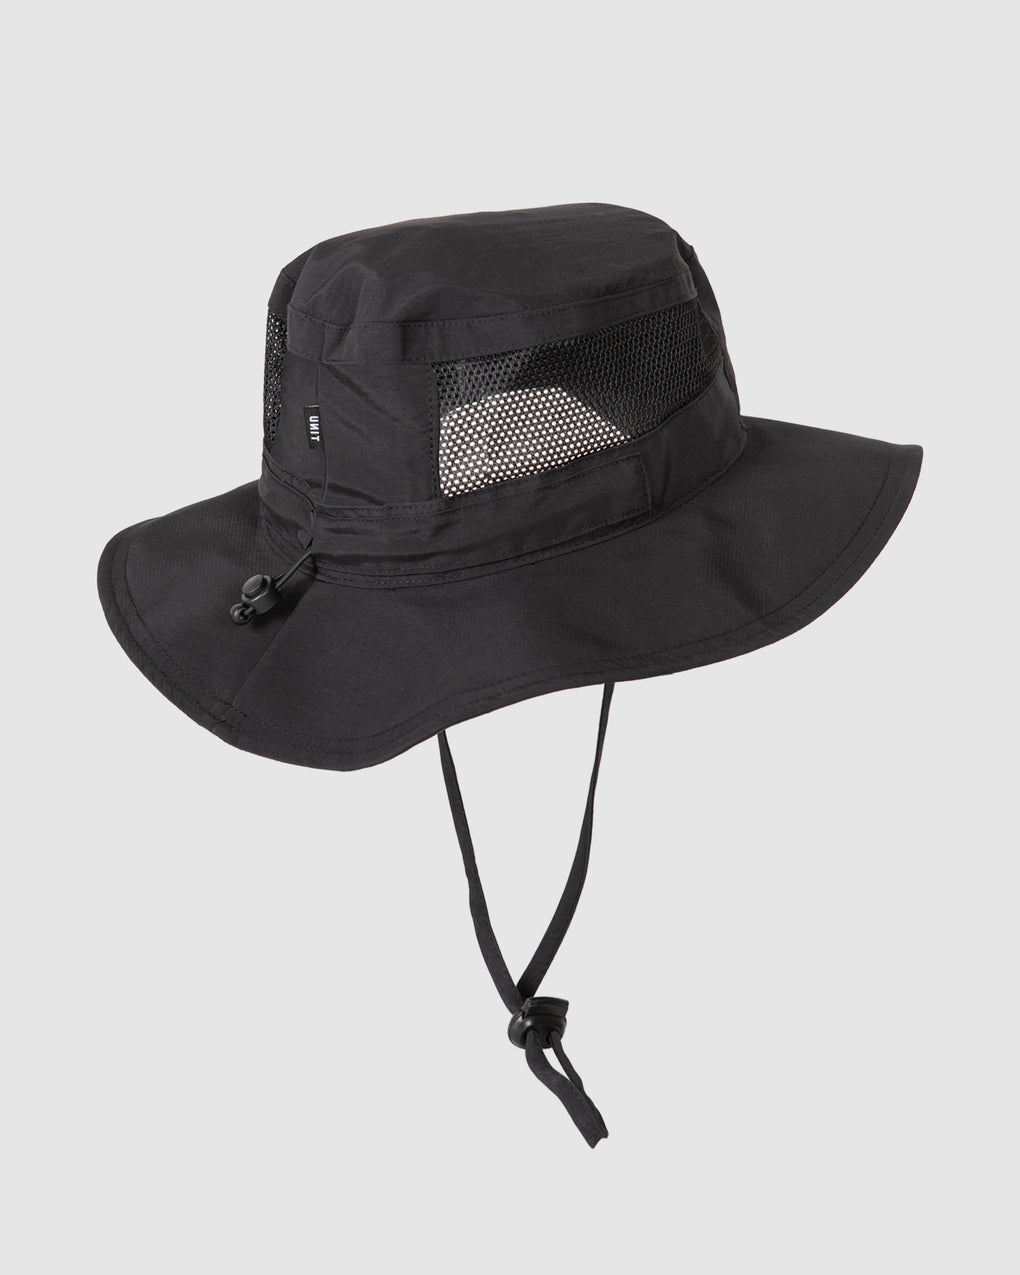 MENS HAT (SUN PROTECTION) BOONEY